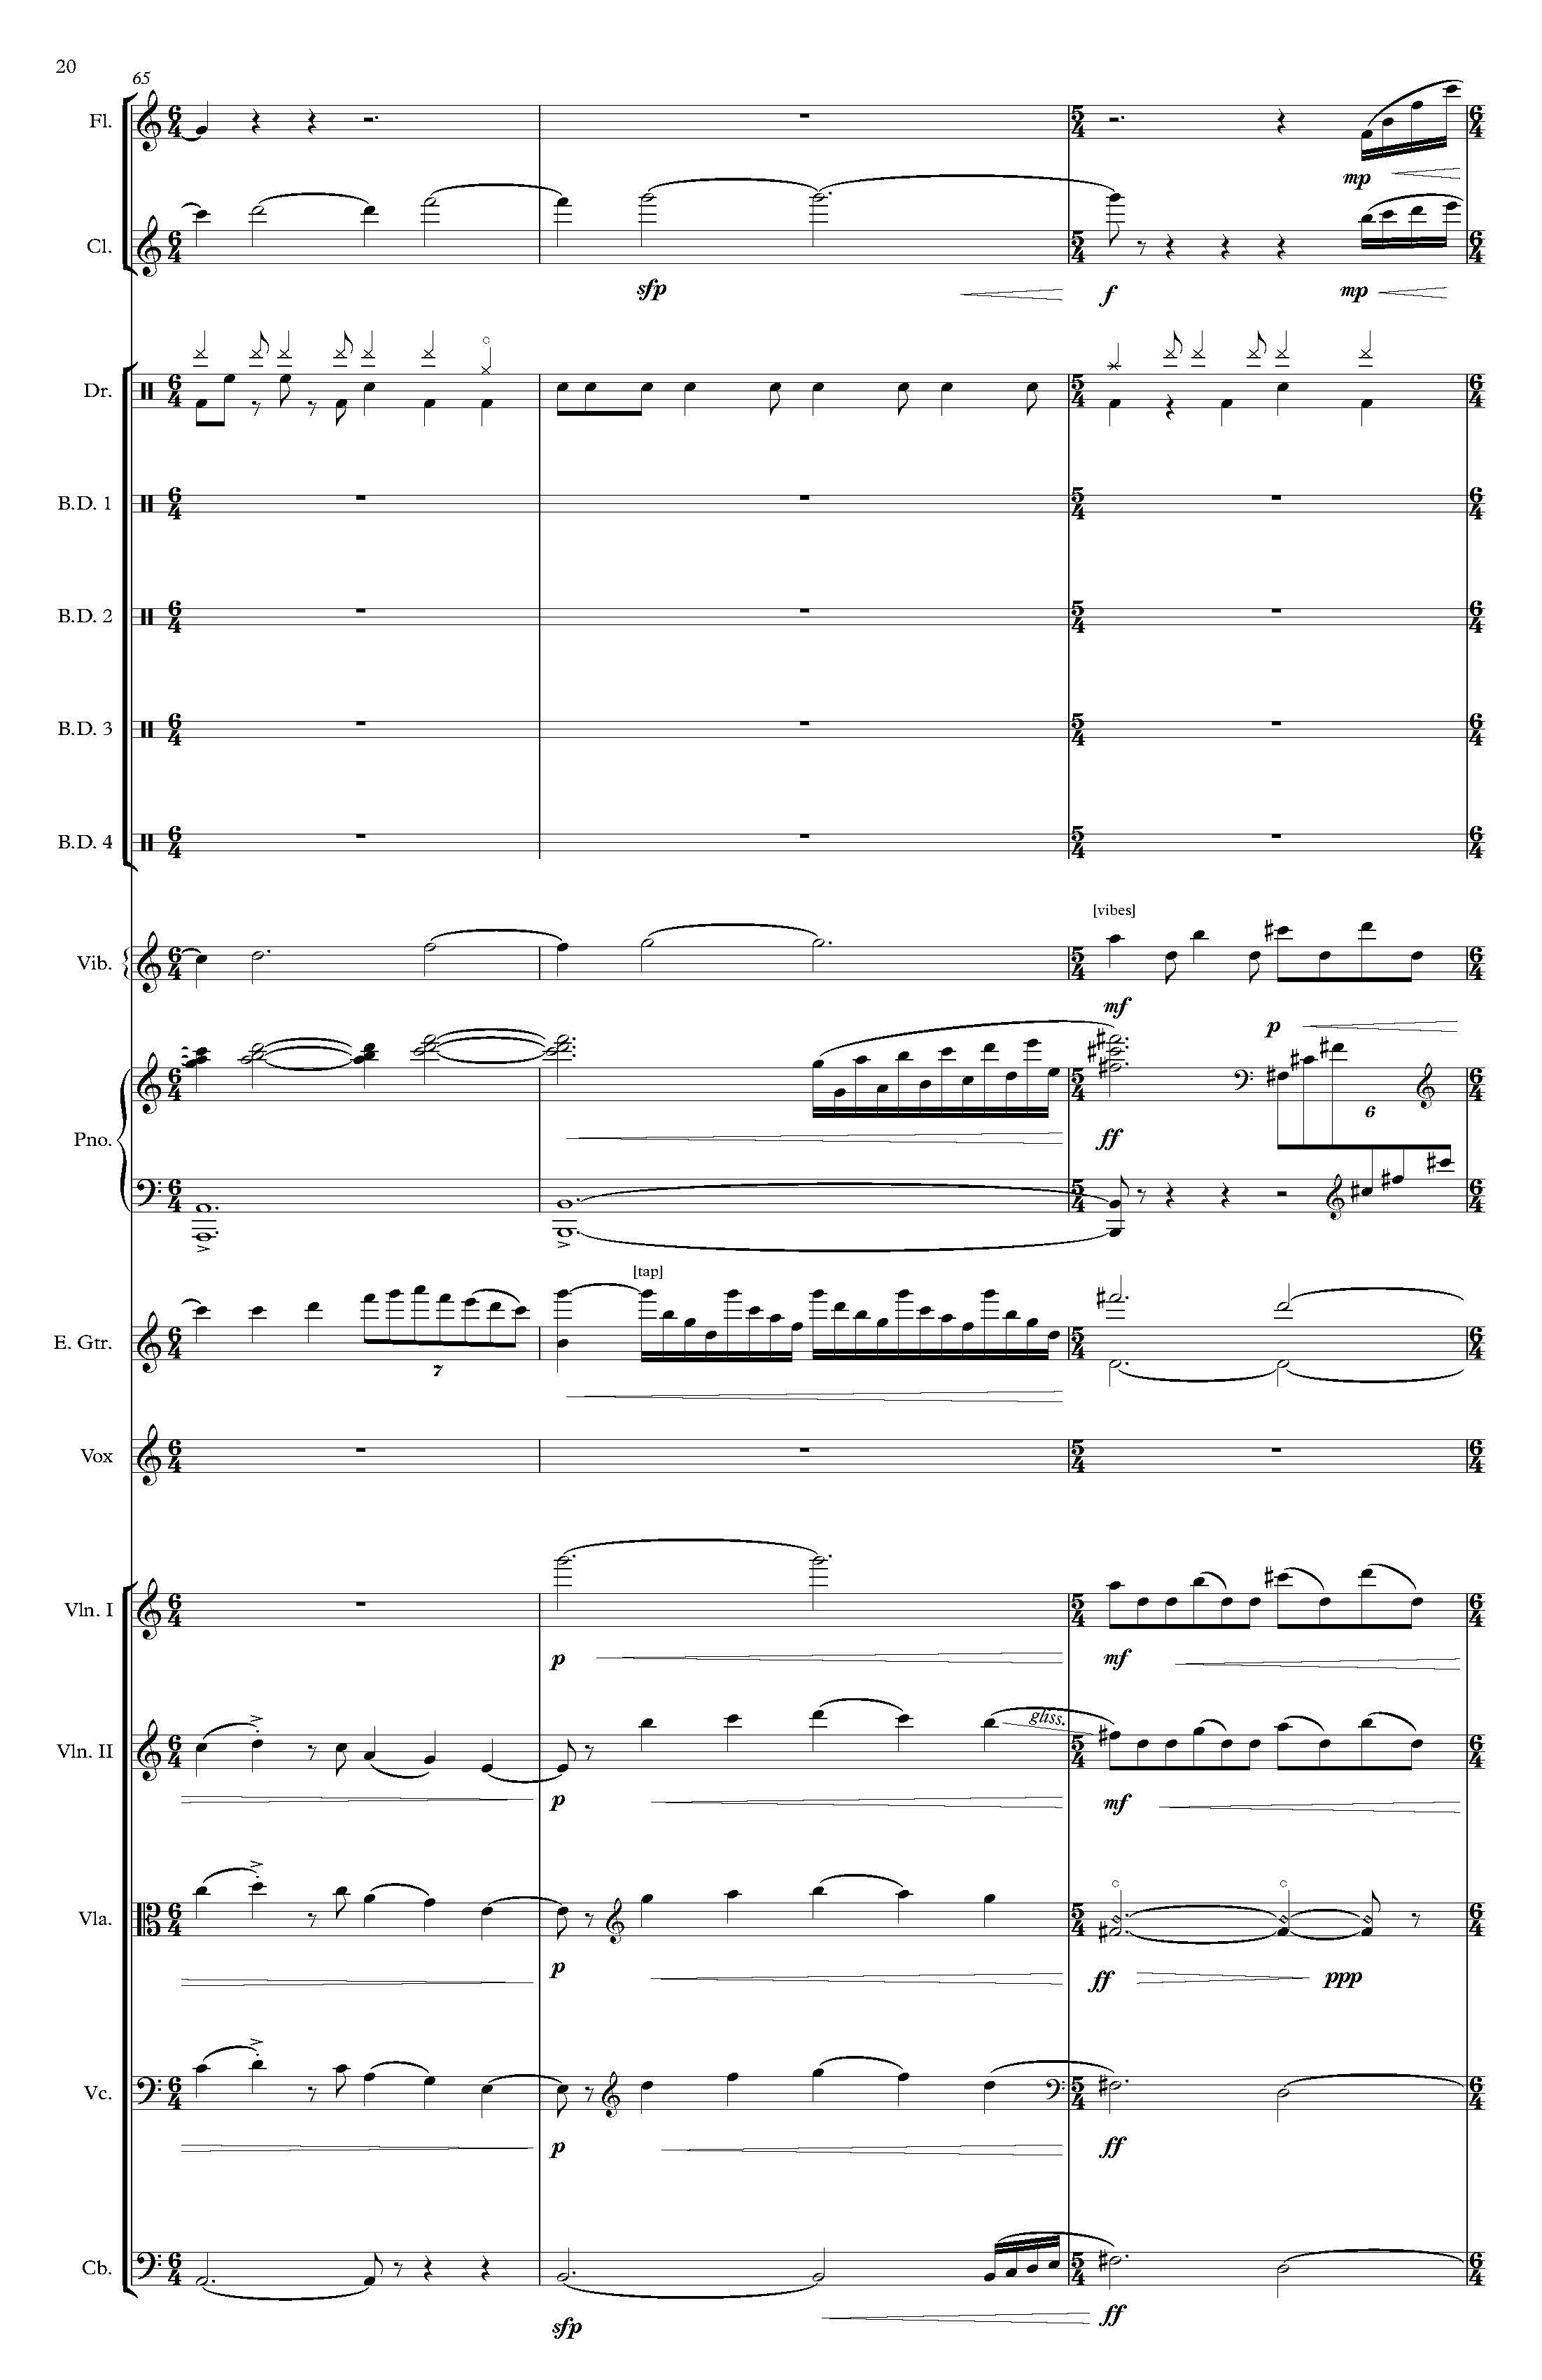 The Rembrandt of Avenue A - Complete Score_Page_26.jpg